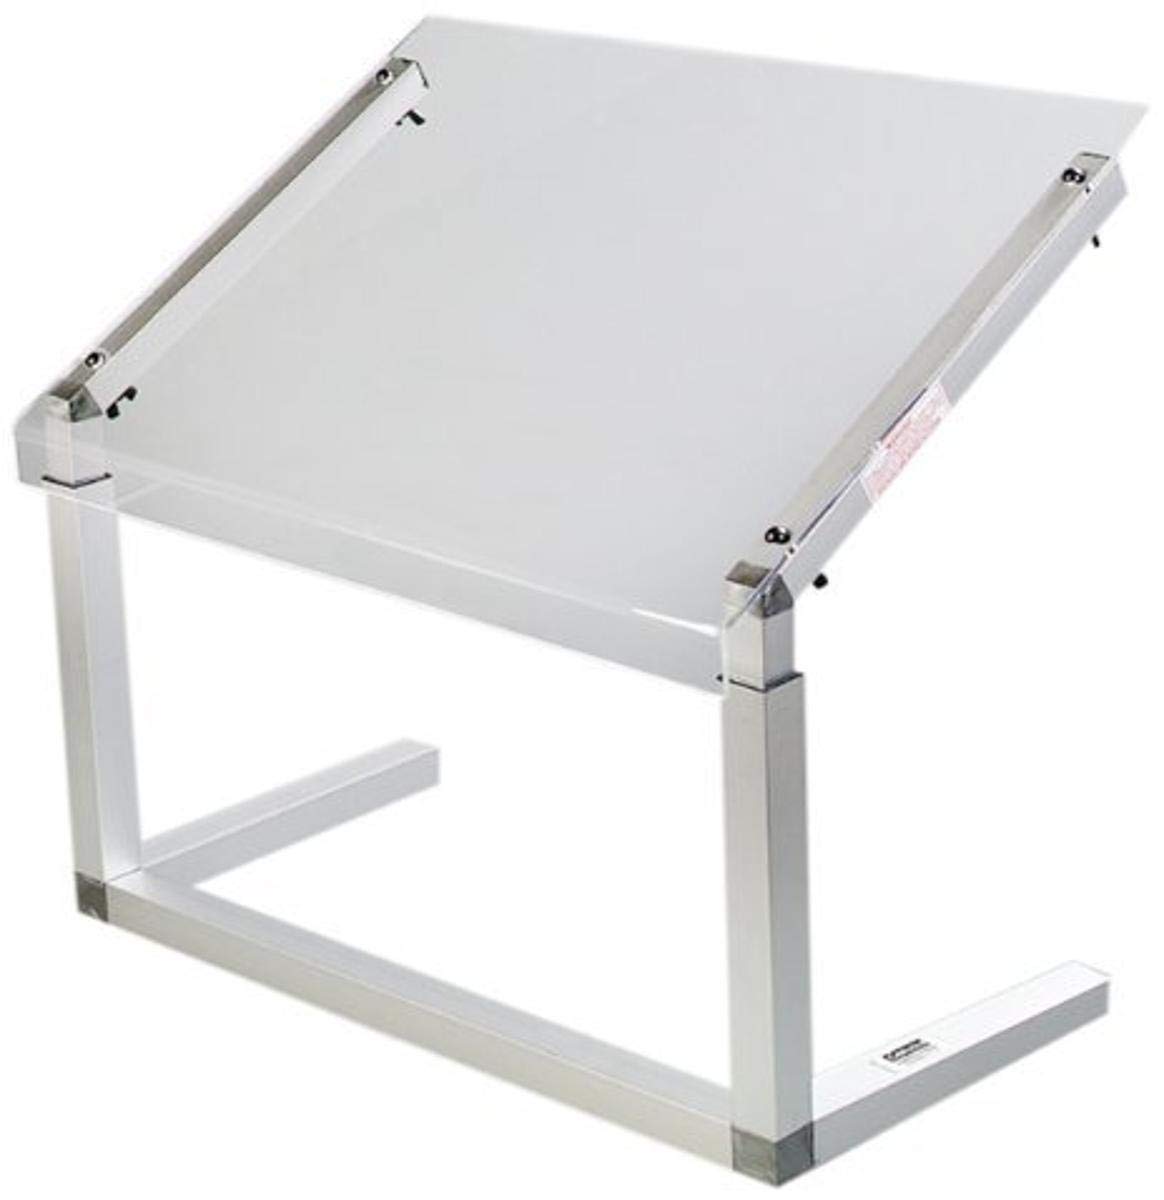 Carlisle FoodService Products Adjustable Sneeze Guard for Restaurant Buffet, Acrylic with Aluminum Frame, 24-1/4